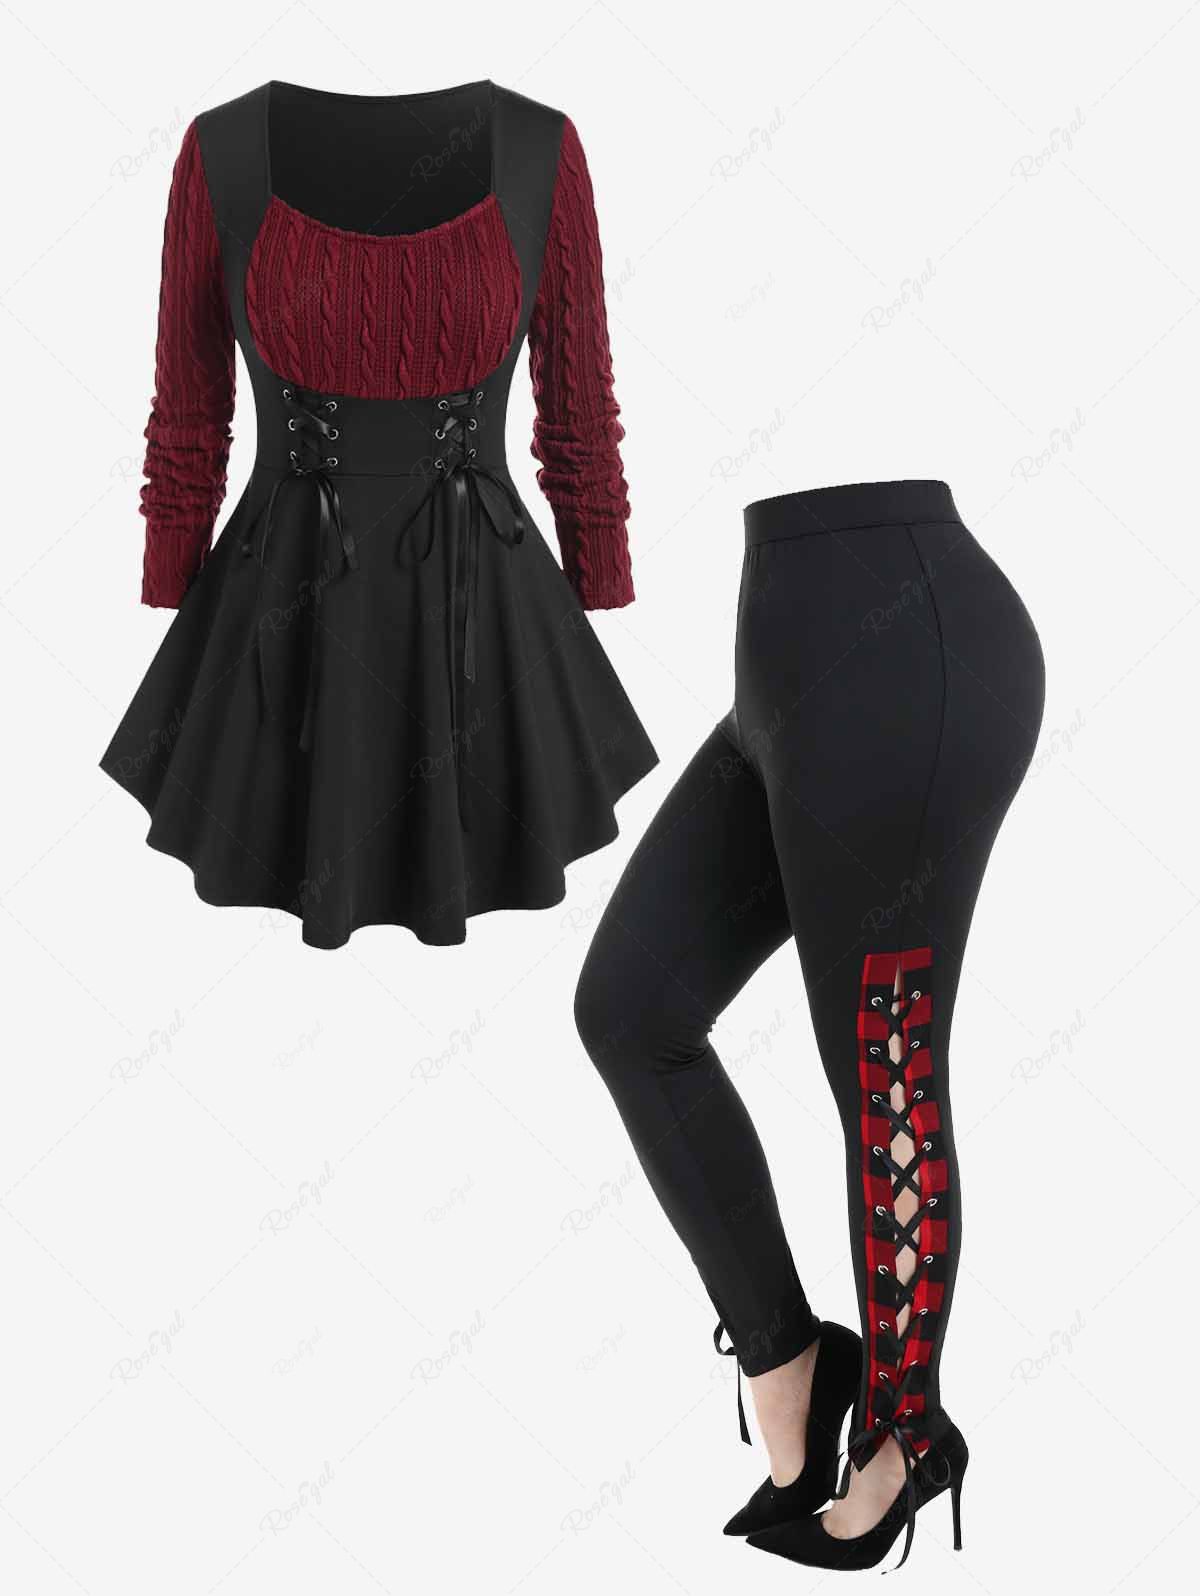 Fancy Mixed Media Cable Knit Panel Lace Up Tee and High Waist Plaid Lace Up Pants Plus Size Outfit  